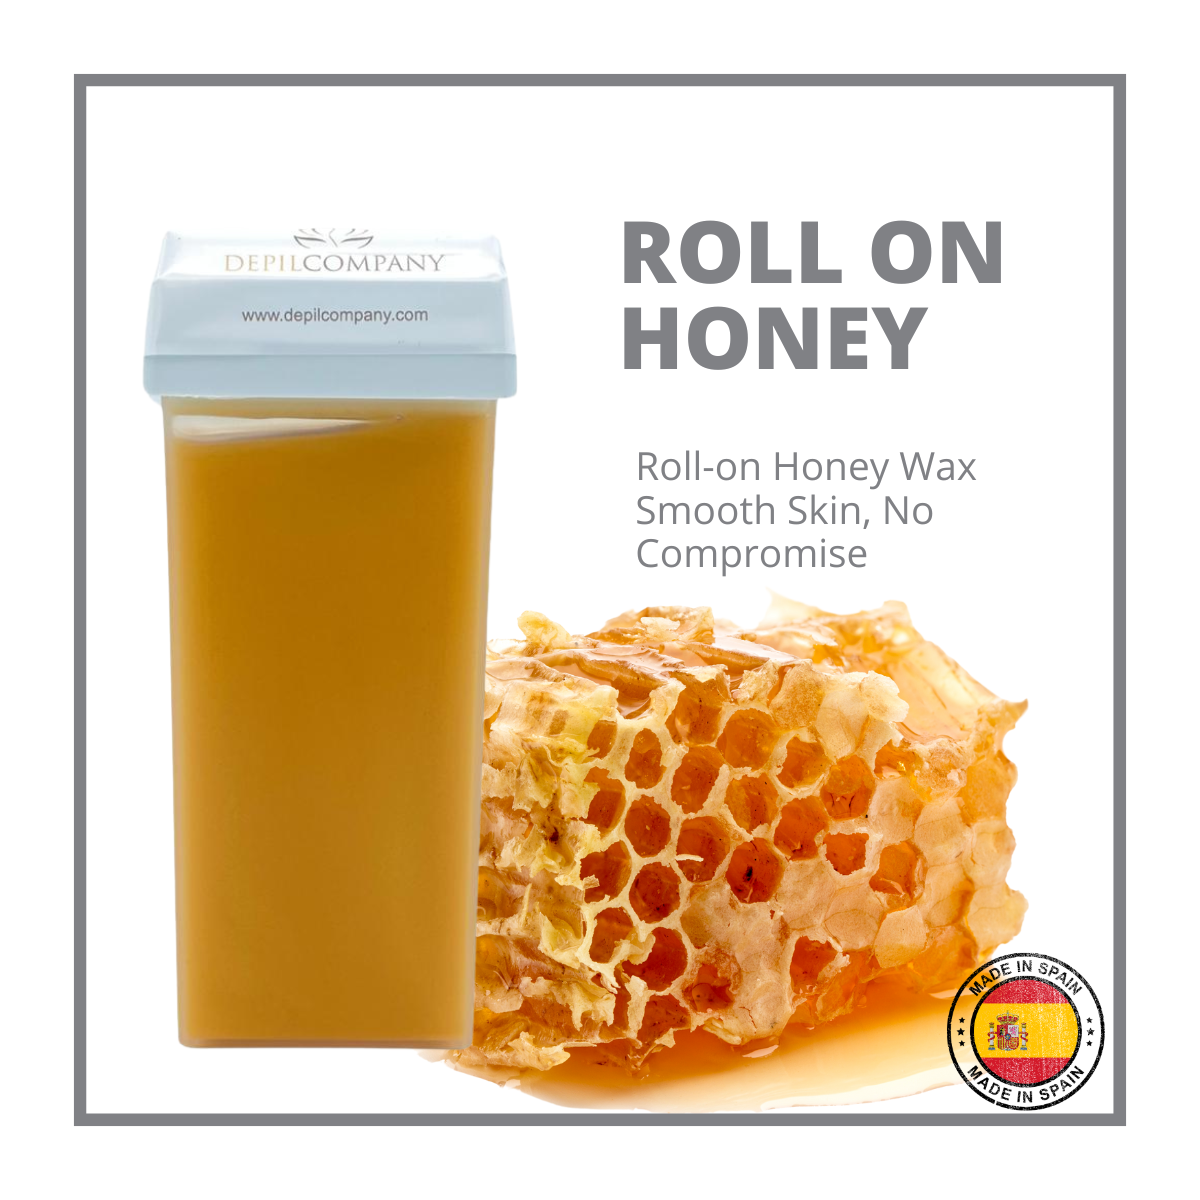 Depilcompany Roll-on Honey Wax, 6 units pack, smooth skin, no compromise, with honeycomb background